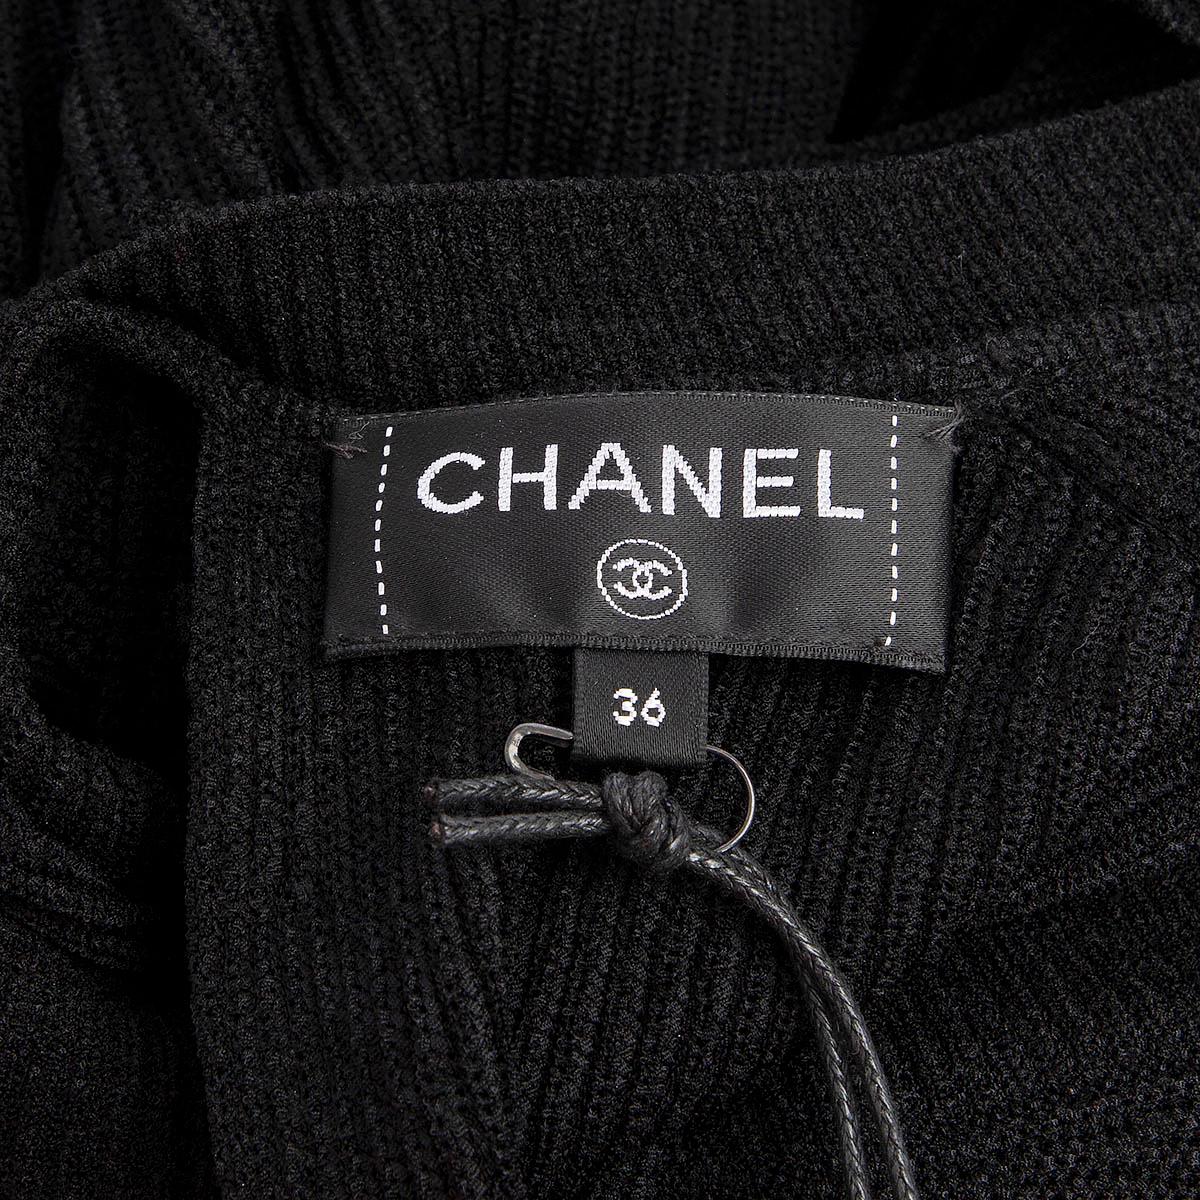 CHANEL black polyester 2017 17P CAPE SLEEVE BACKLESS RIB-KNIT Dress 36 XS For Sale 1